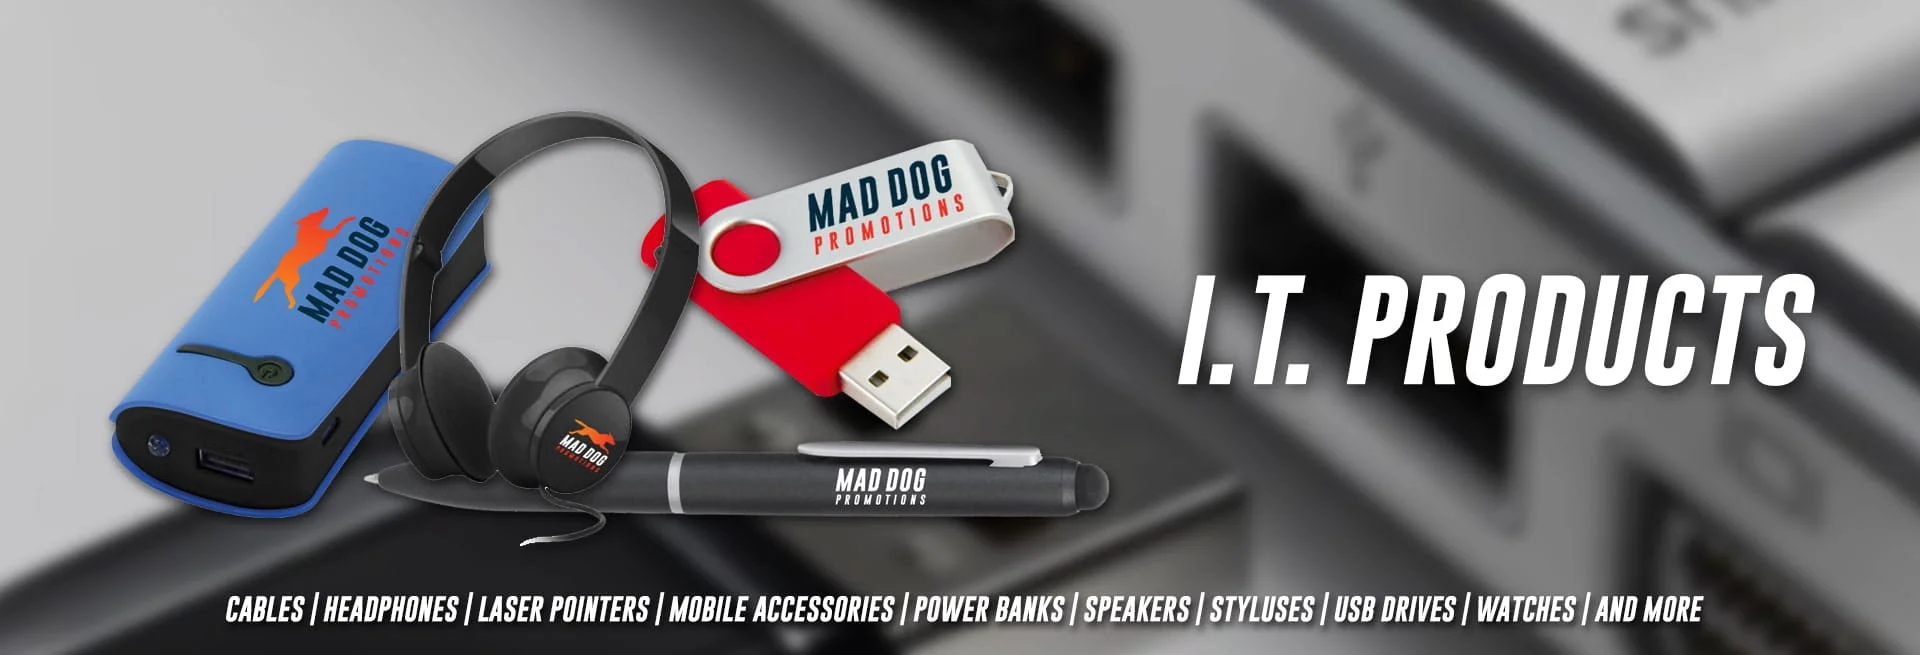 Custom IT Products Online in Perth - Mad Dog Promotions